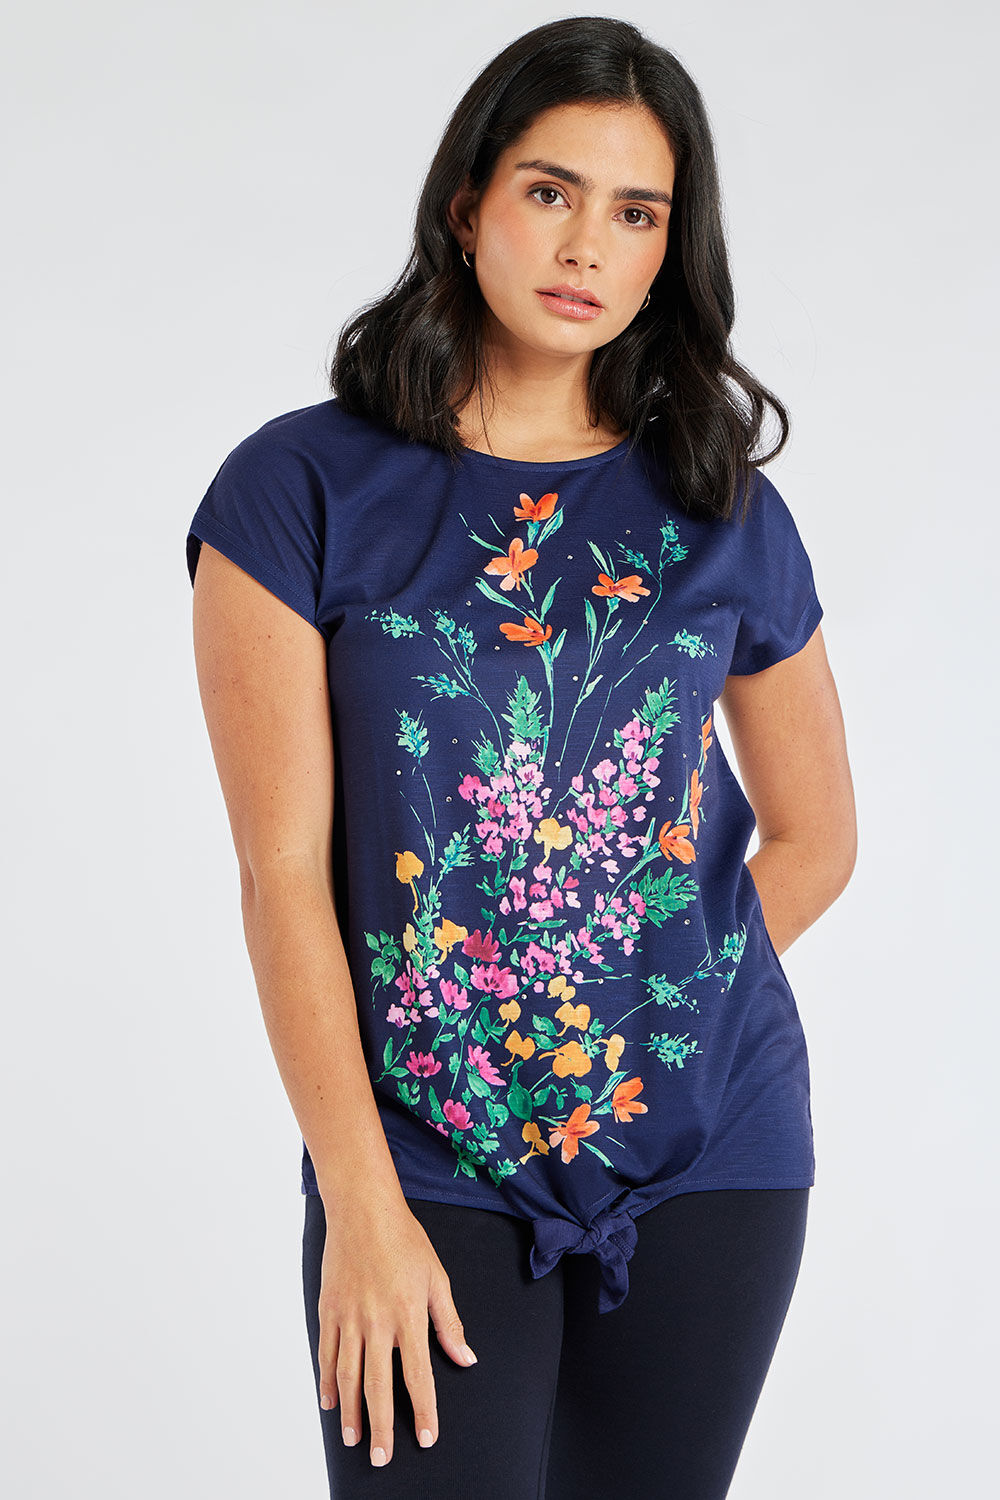 Bonmarche Navy Short Sleeve Sprig Floral Print T-Shirt With Tie Front, Size: 14